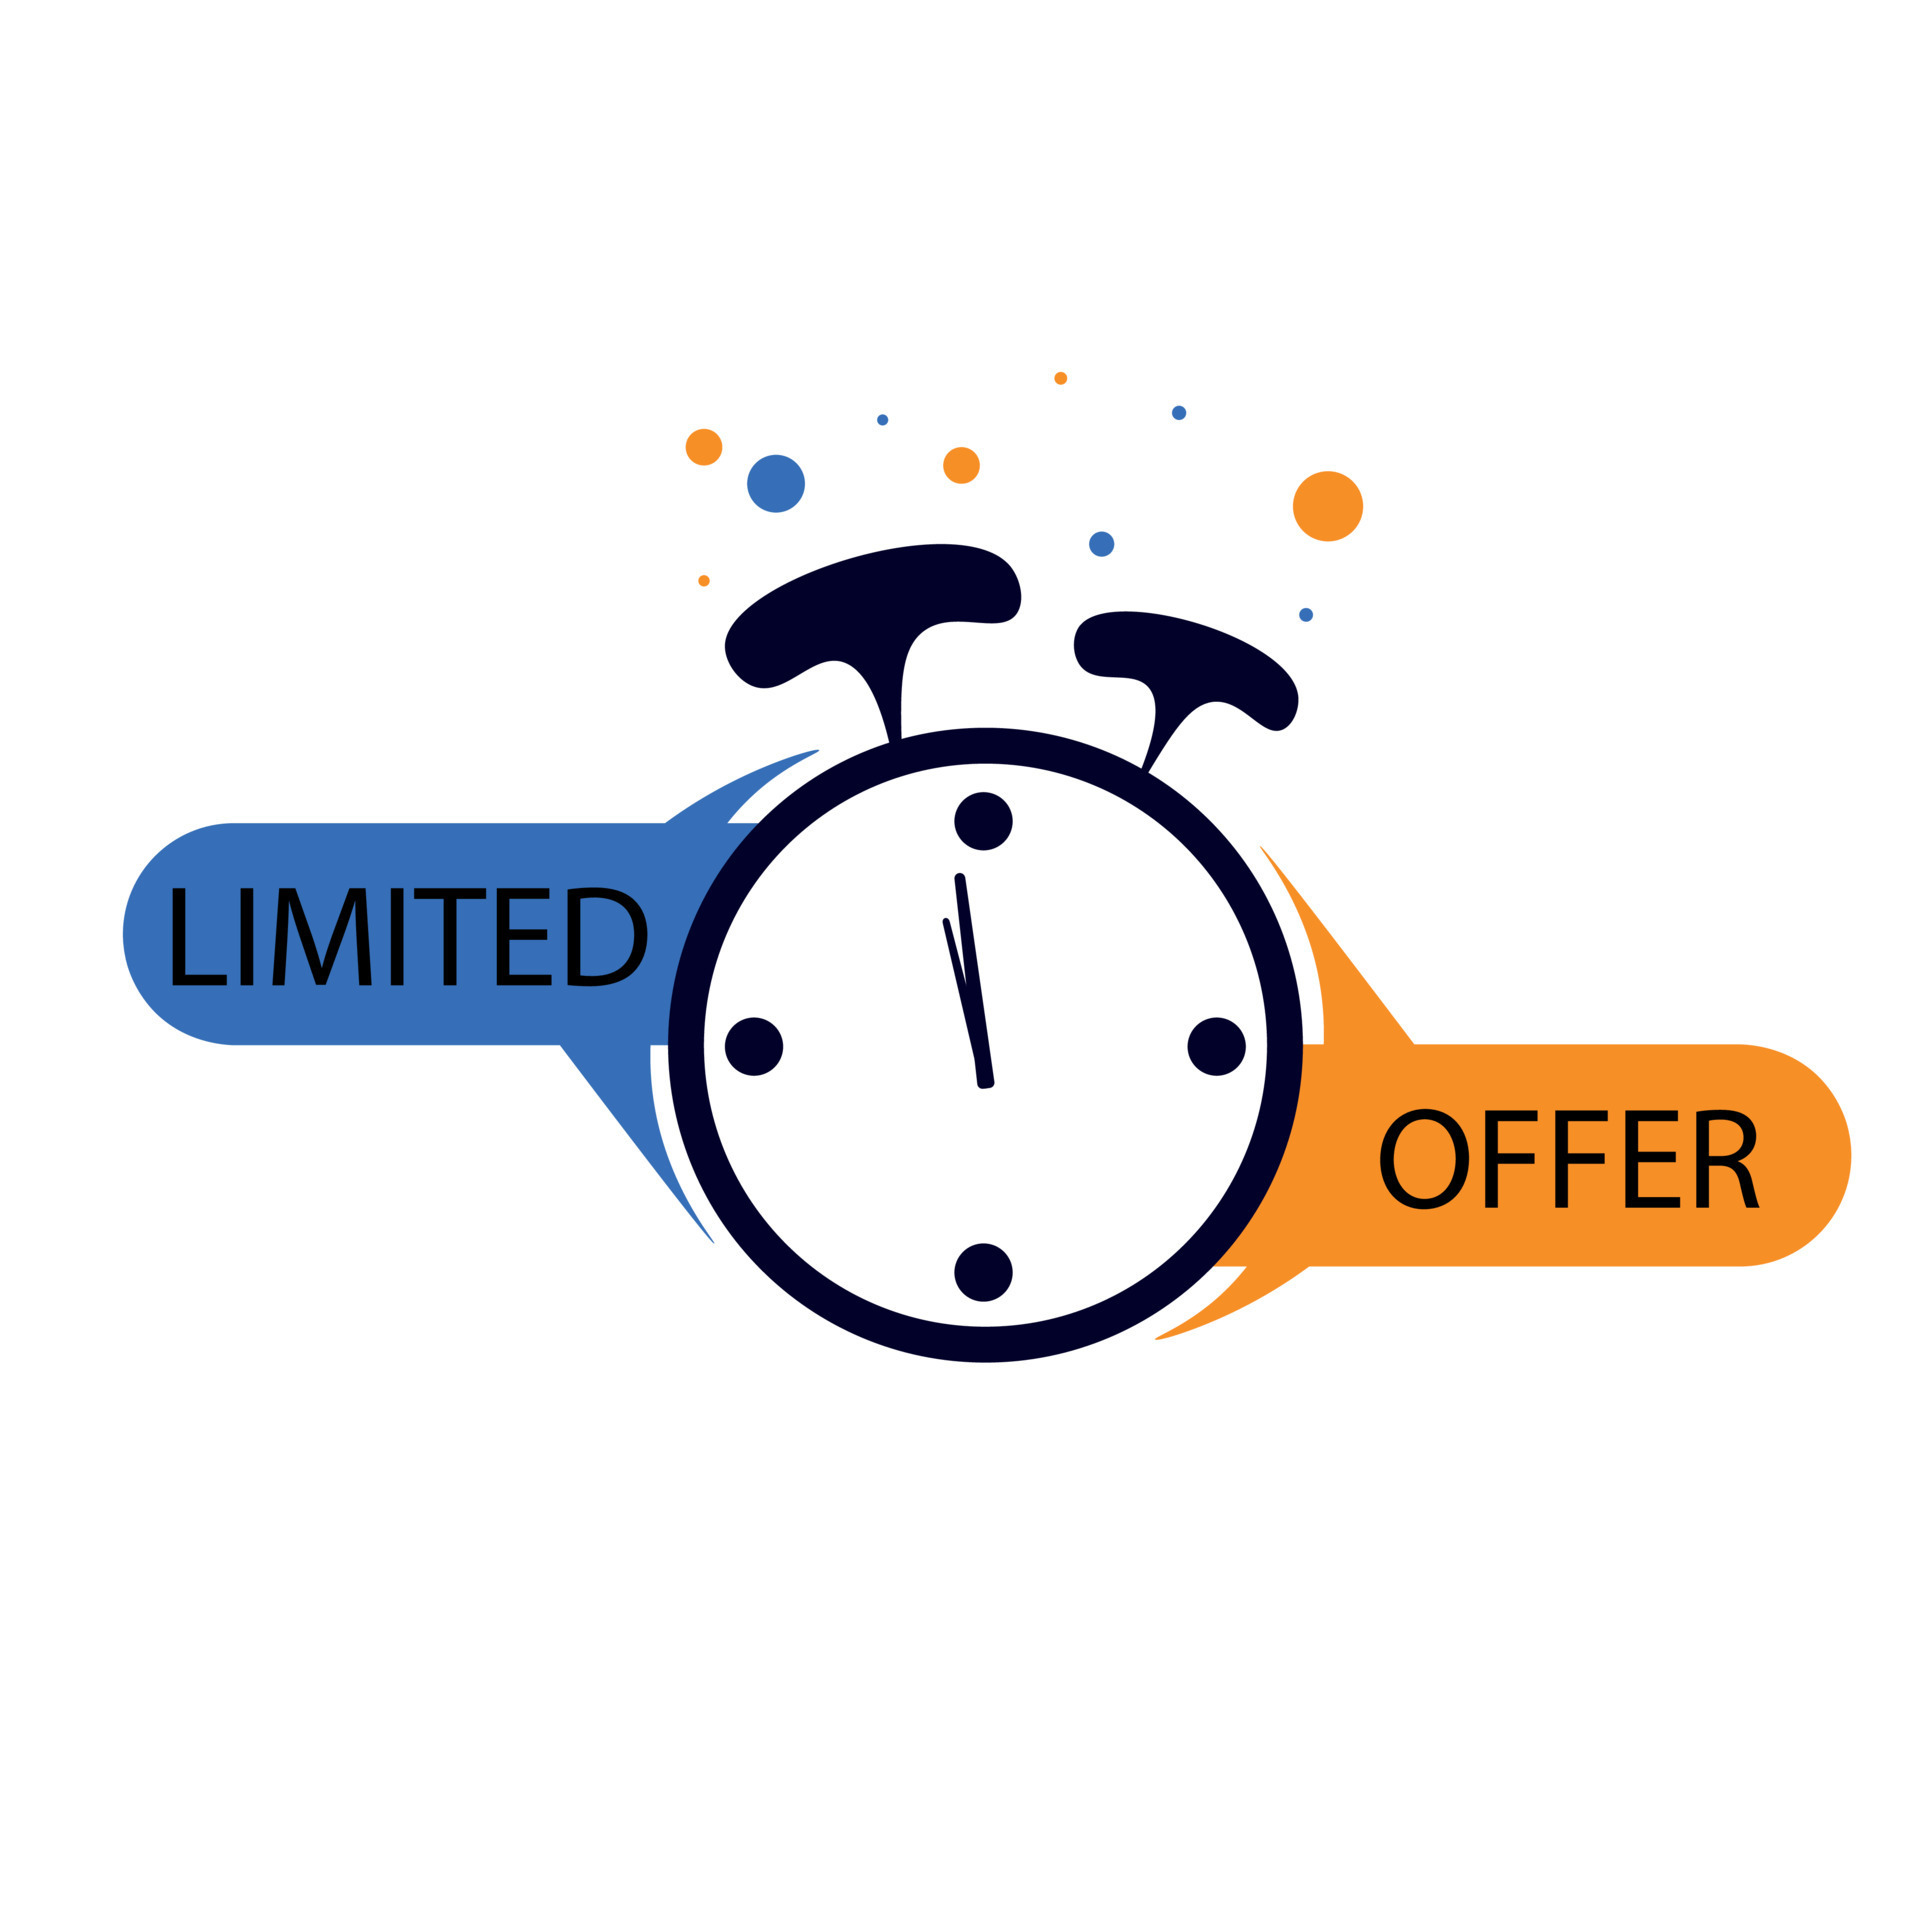 Last minute limited offer with clock for sale promo, button, logo